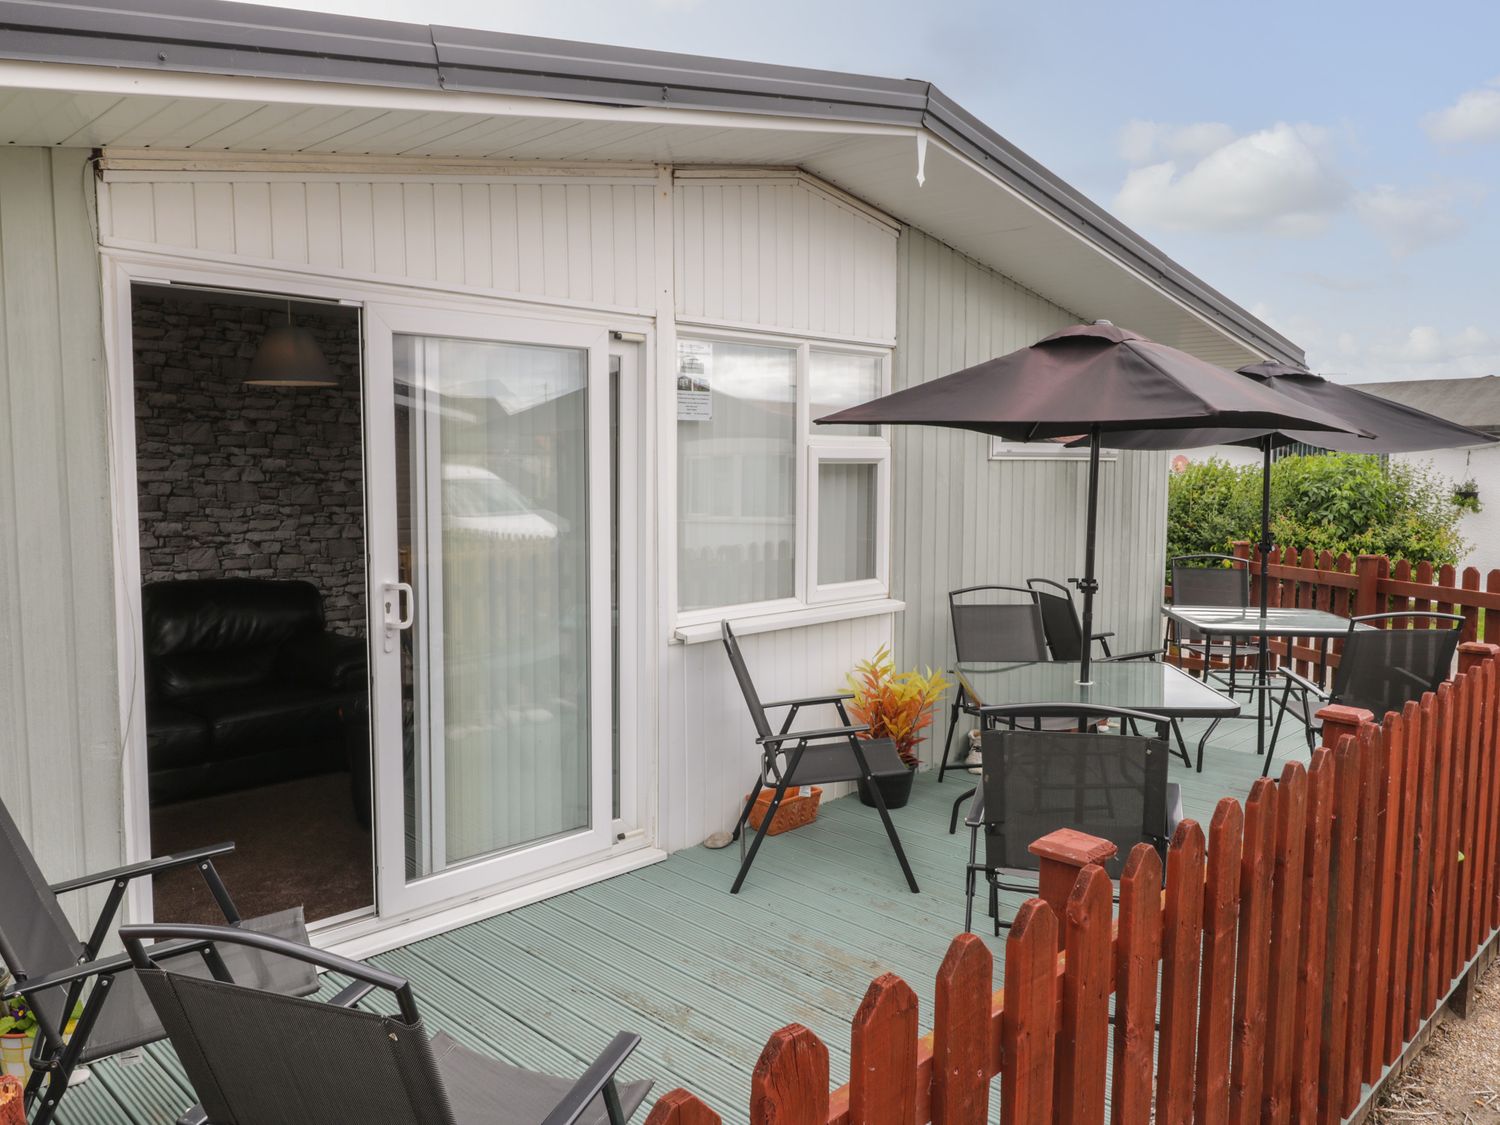 126 Seaside Getaway - North Yorkshire (incl. Whitby) - 1110674 - photo 1